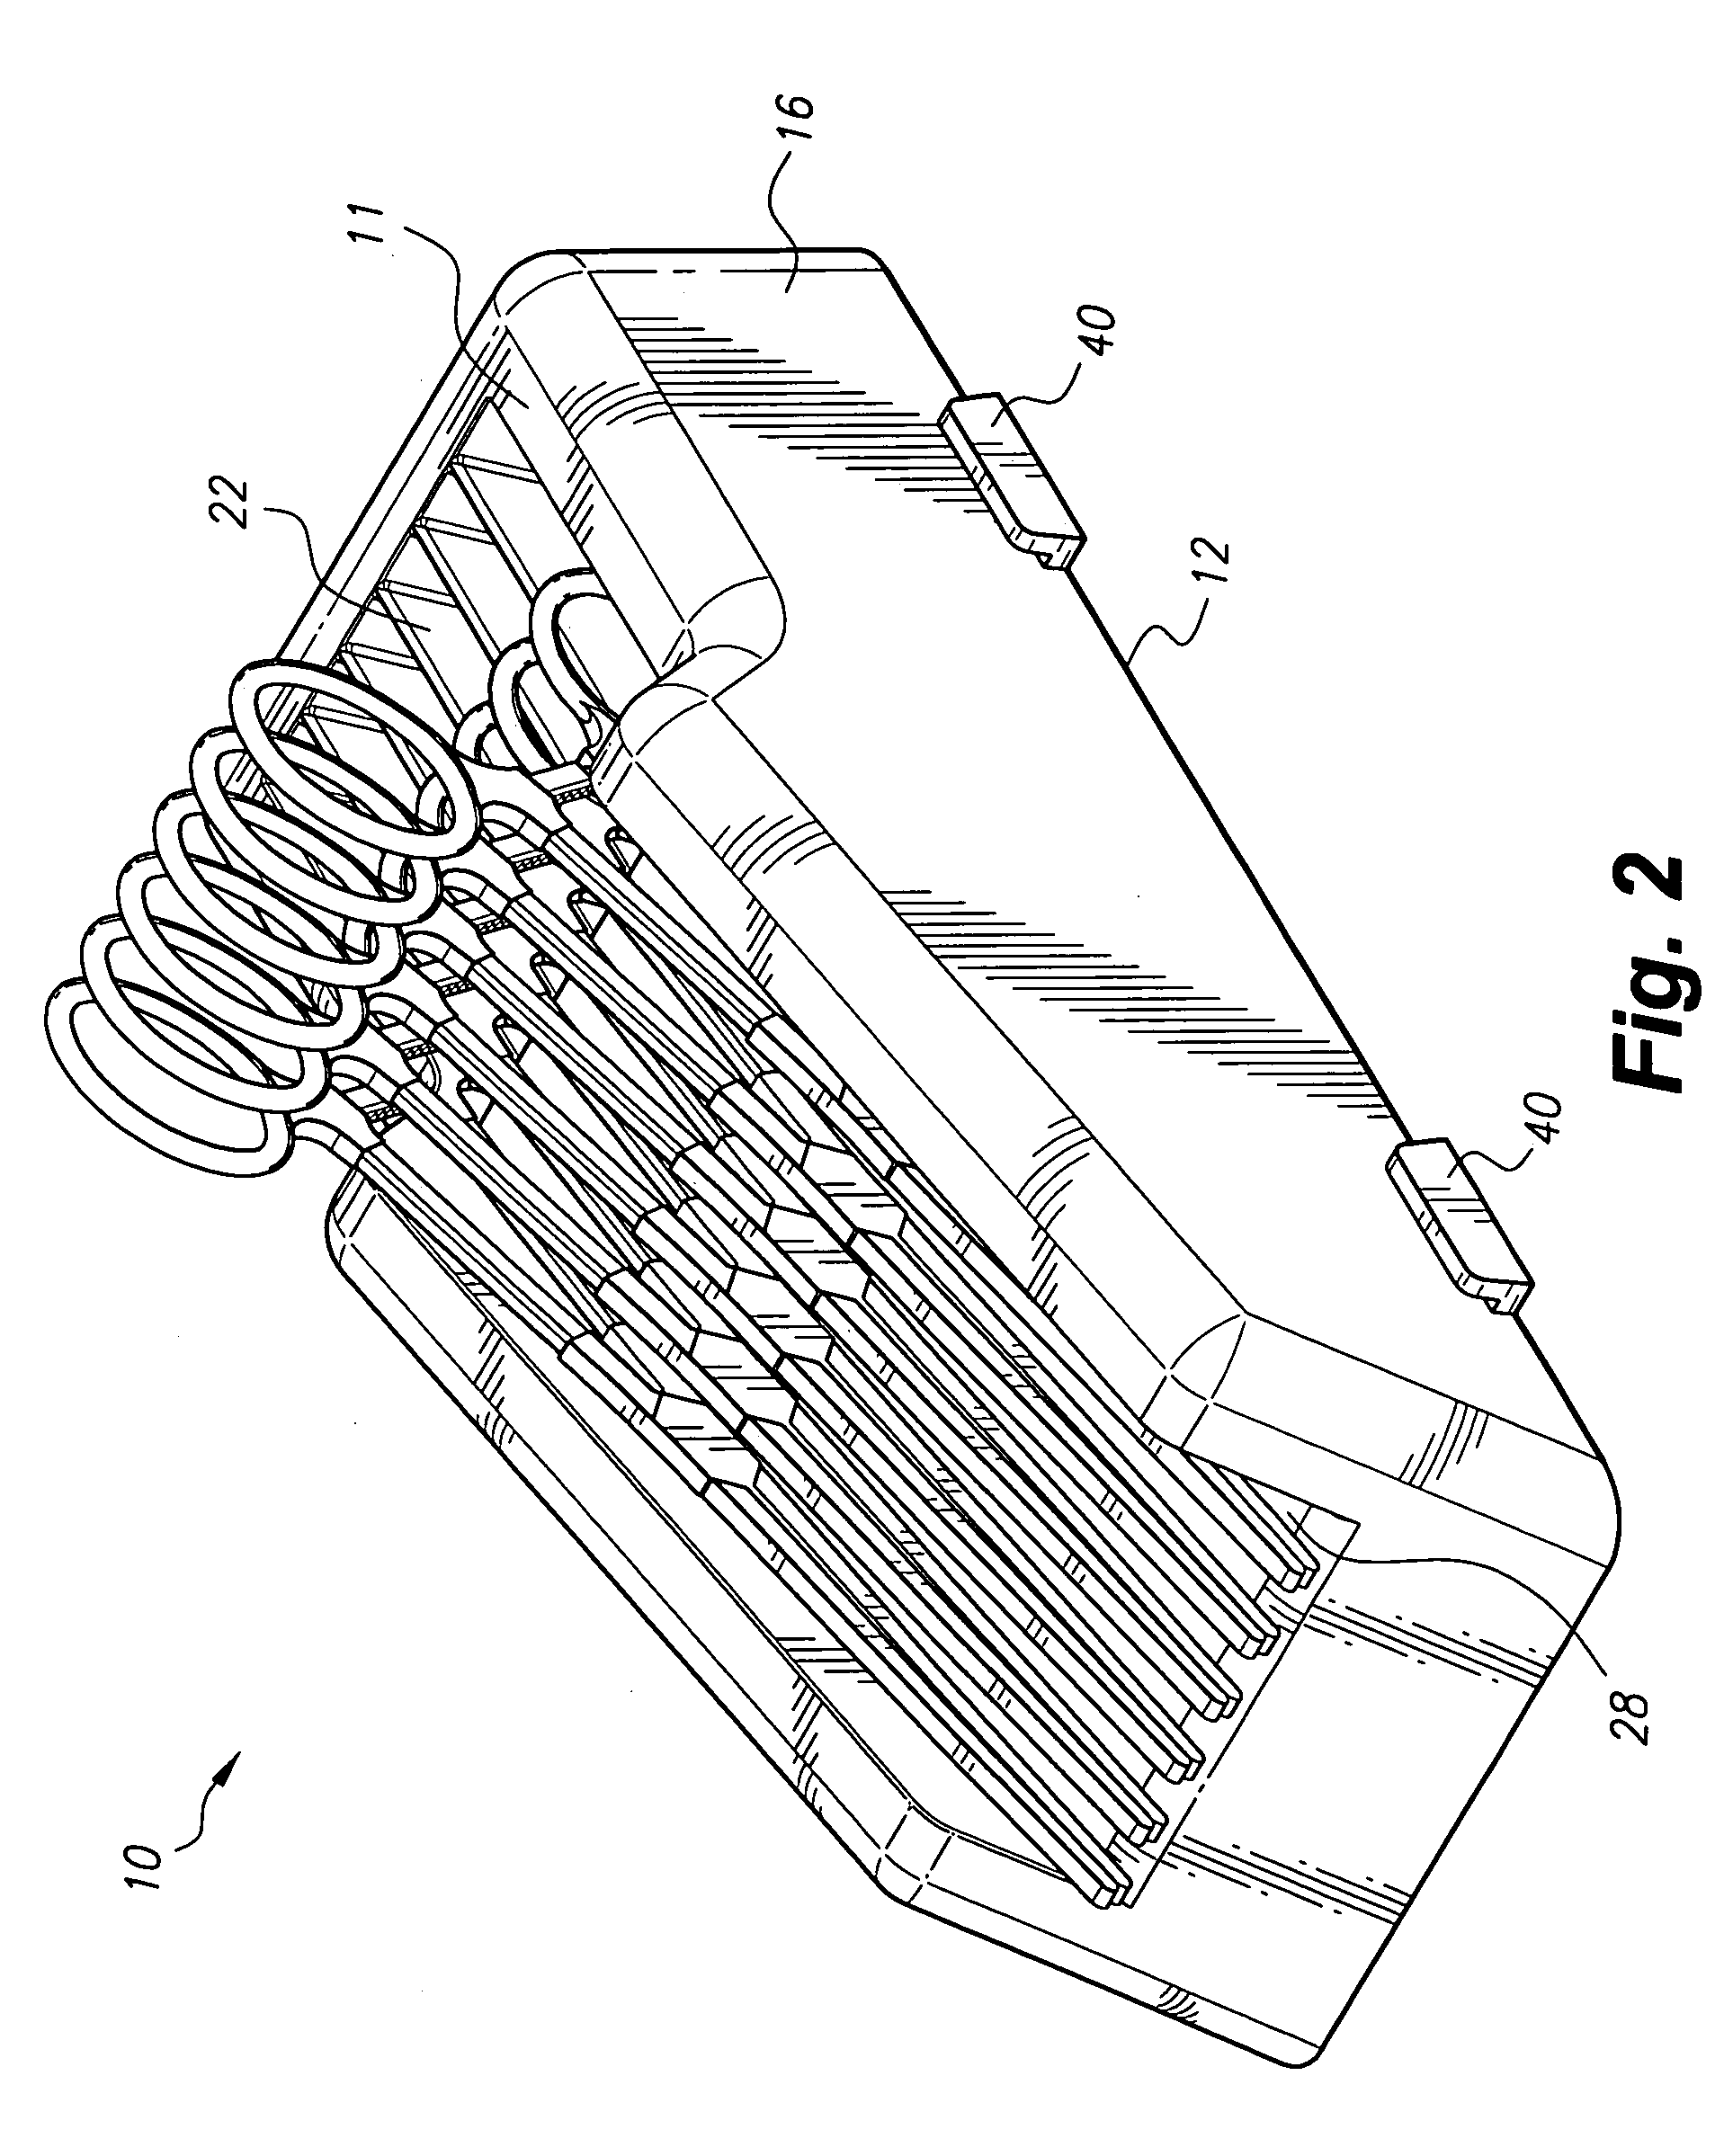 Grooved angled tray for ring-handled surgical instruments